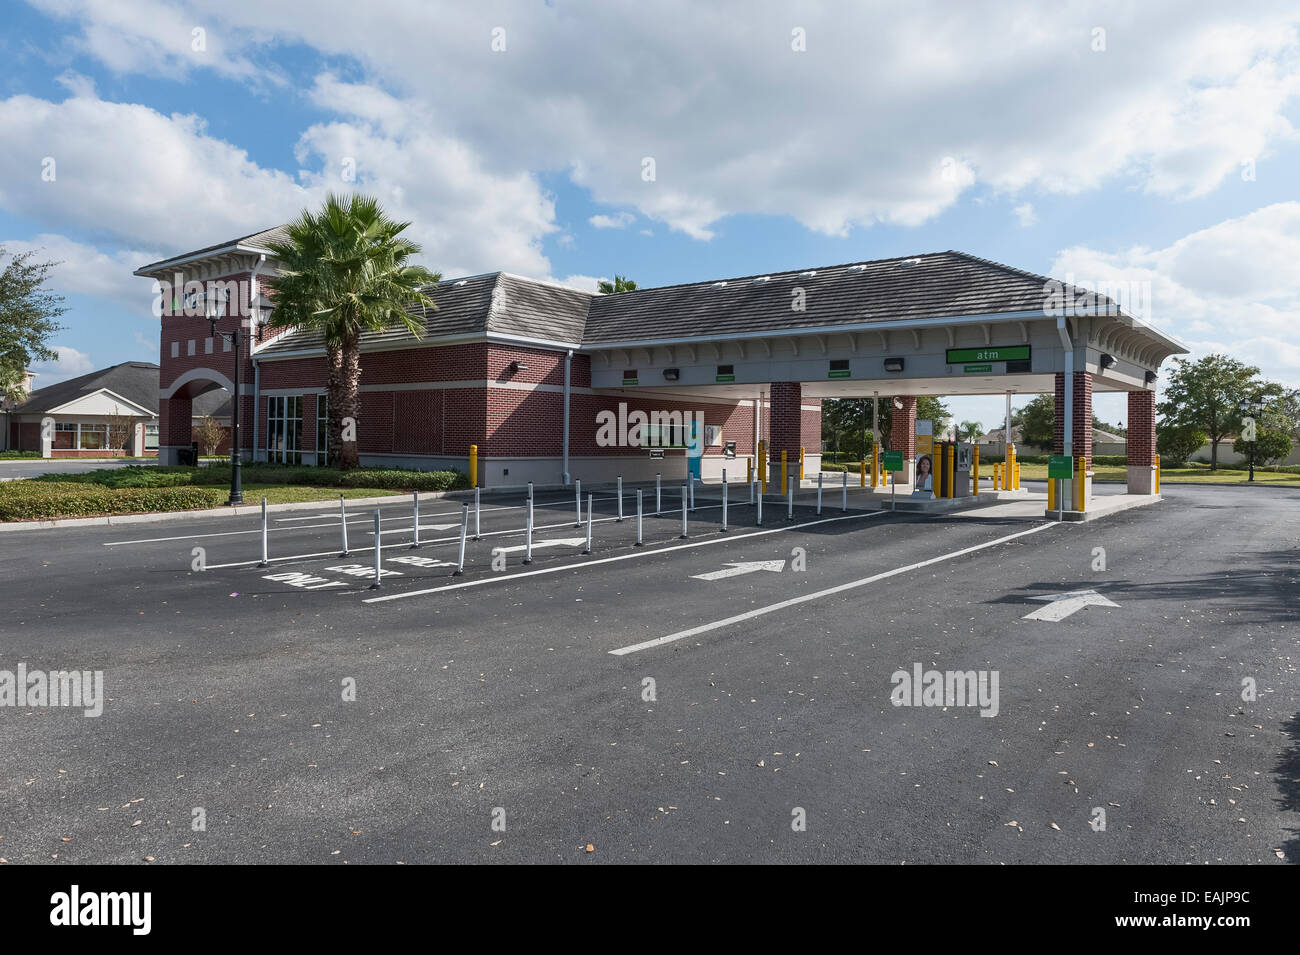 Regions Bank Drive Thru ATM Building located in The Vilages, Florida USA Stock Photo